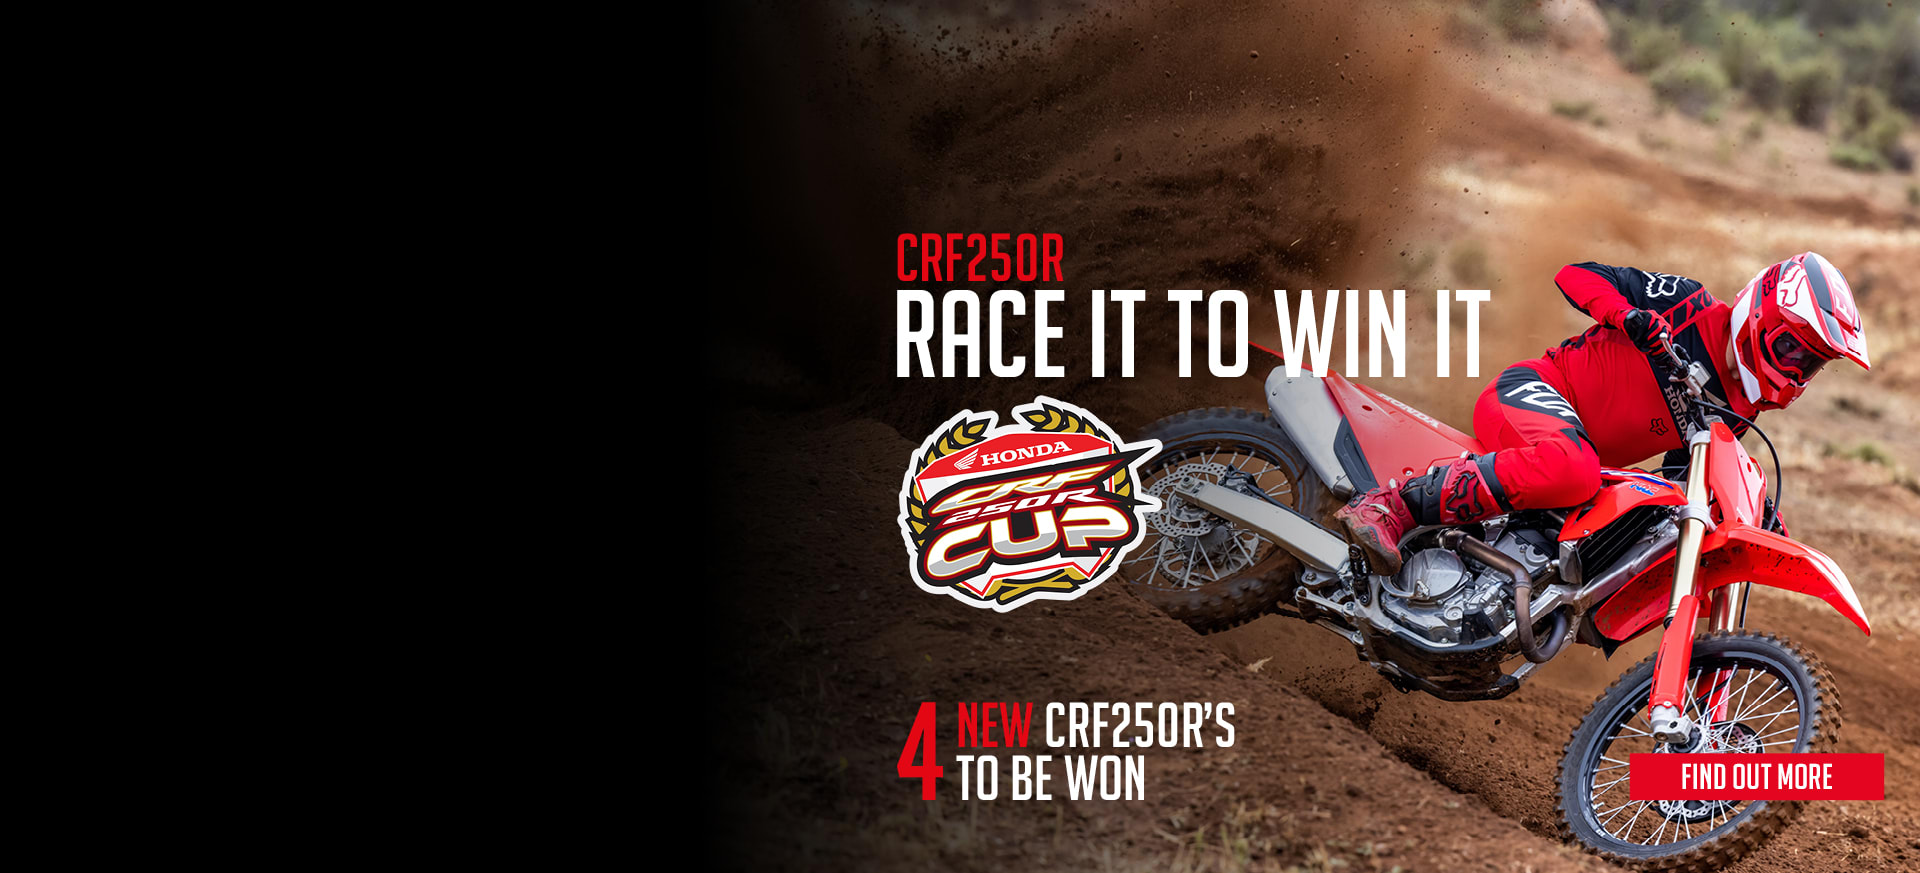 CRF250R cup